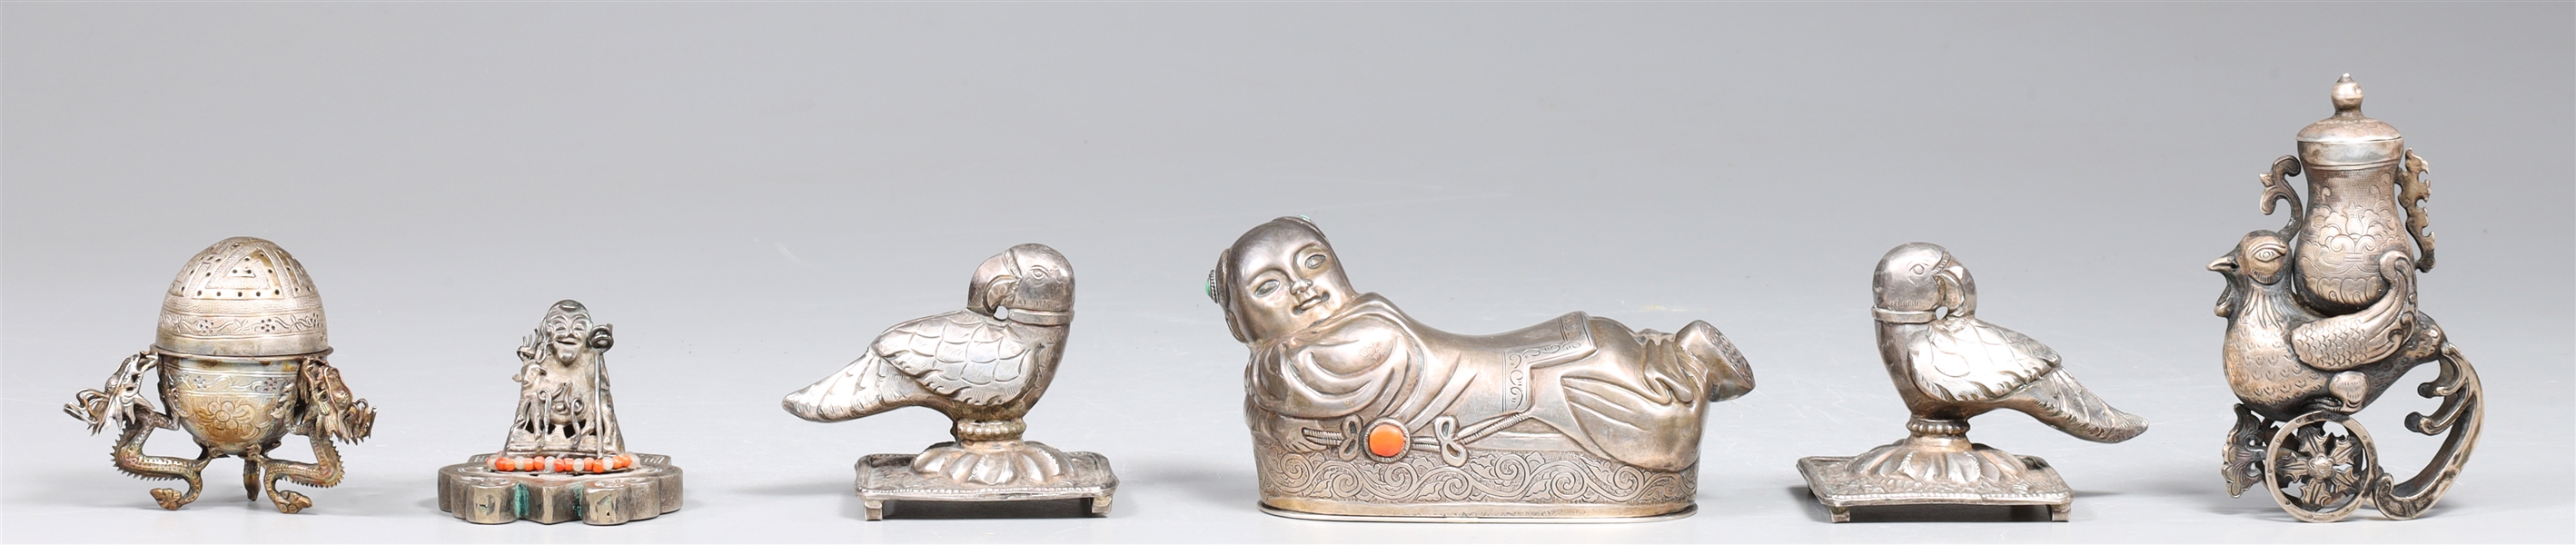 Group of various Chinese objects 303cfc